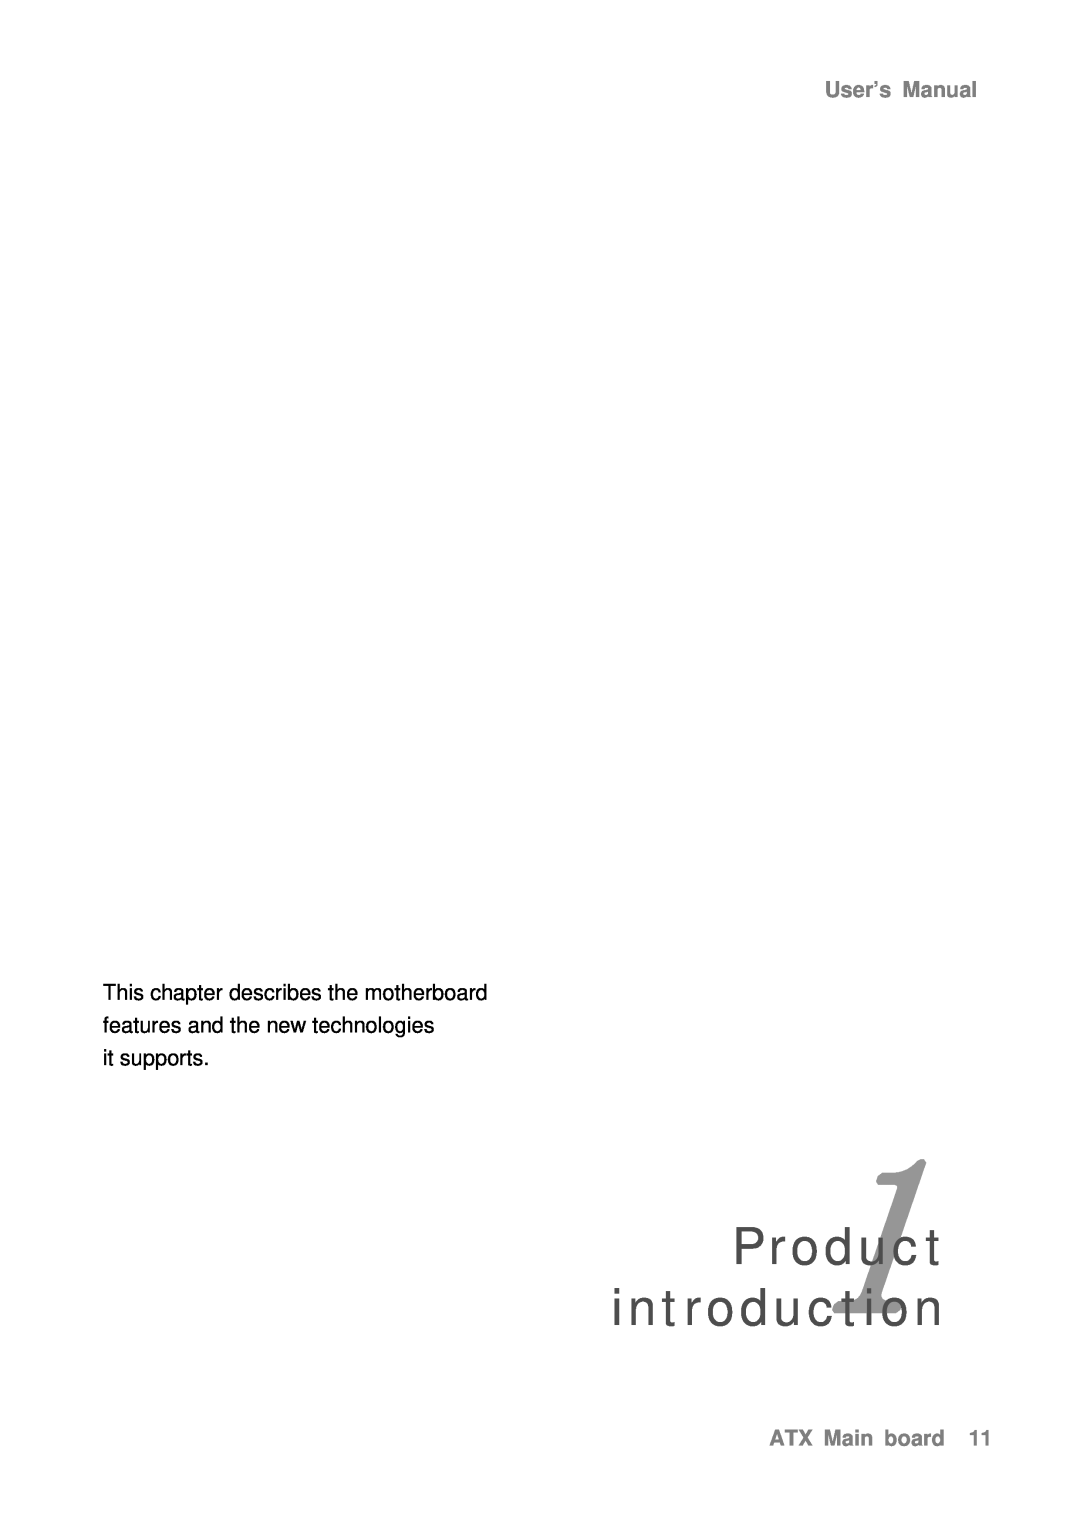 Intel AX965Q user manual Product1 introduction, User’s Manual, it supports, ATX Main board 